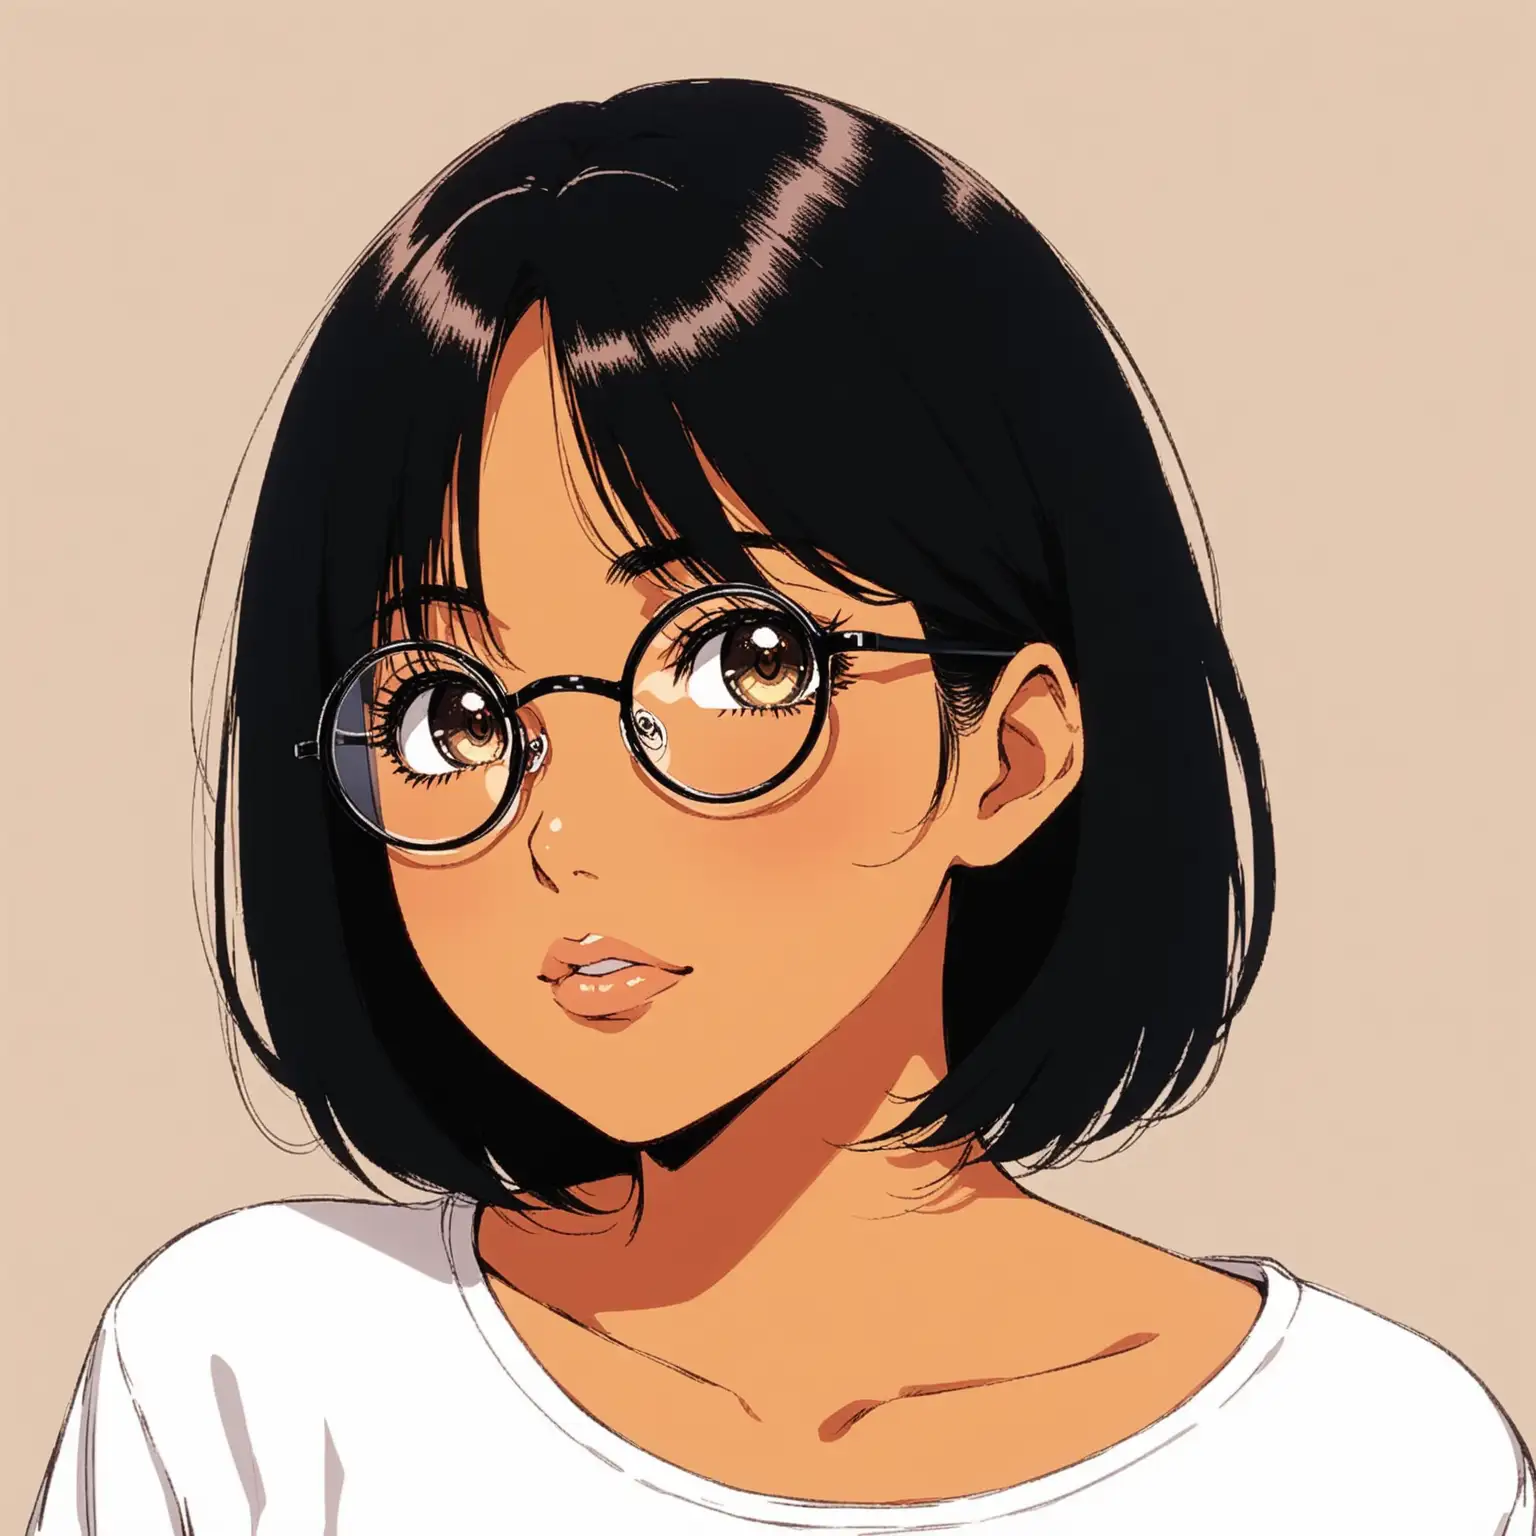 woman with tanned skin looking under her eyelashes, dark brown eyes wearing black round eyeglasses, shoulder length black hair parted in the middle, body facing straight forward with head tilted down to the left, large anime eyes, glossy nude colored full lips slightly smiling, wearing plain white shirt, anime style, minimalist bedroom background, retro 90s anime look